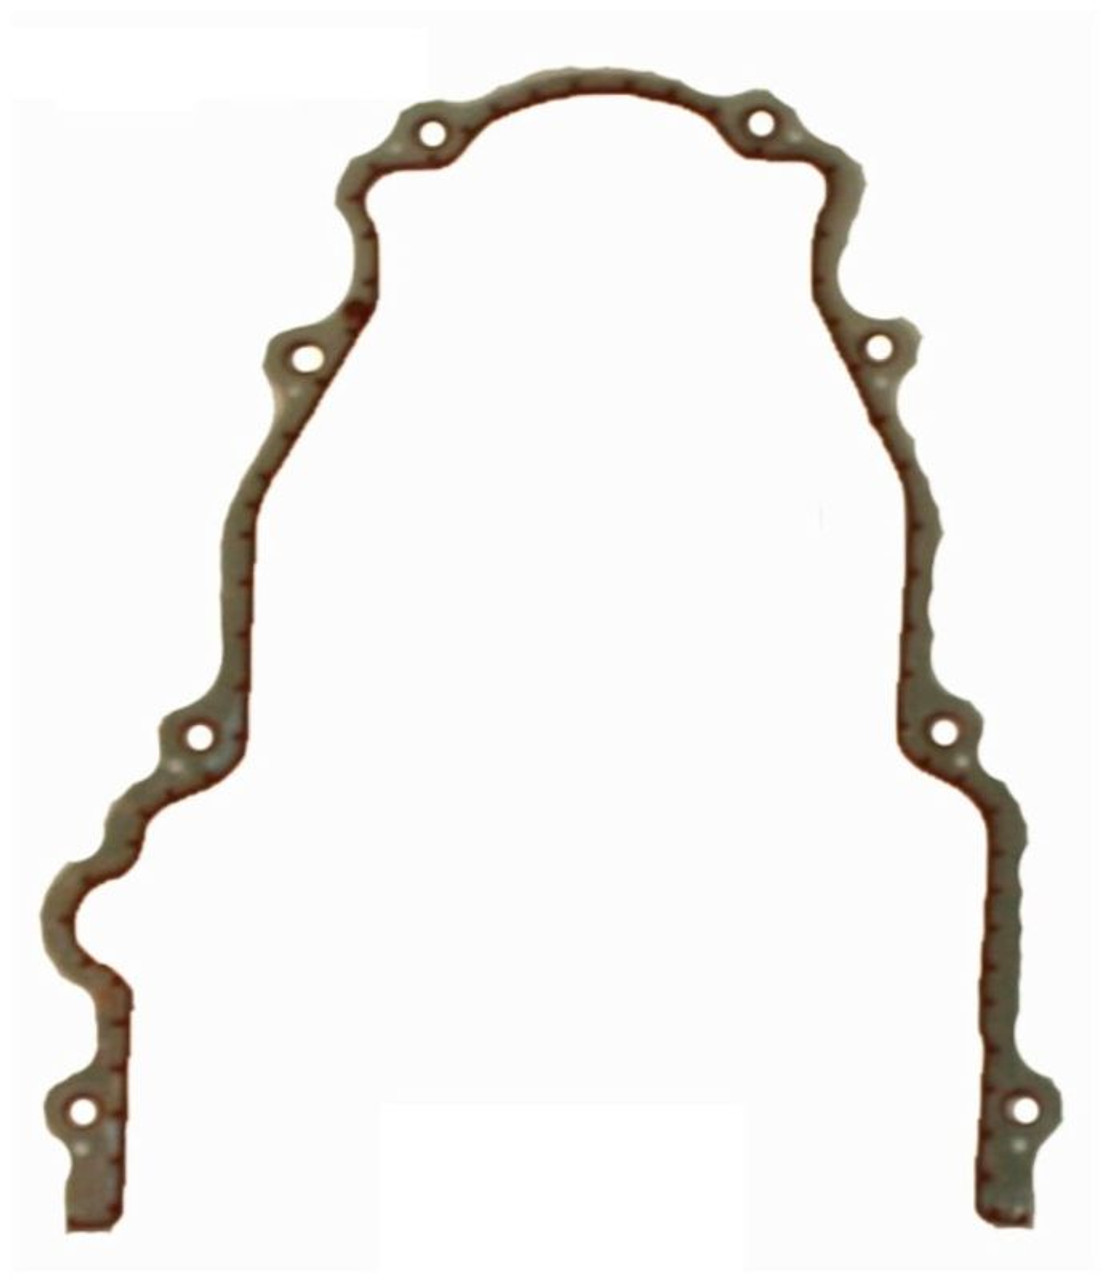 2007 Chevrolet Tahoe 4.8L Engine Timing Cover Gasket TCG293-A -421